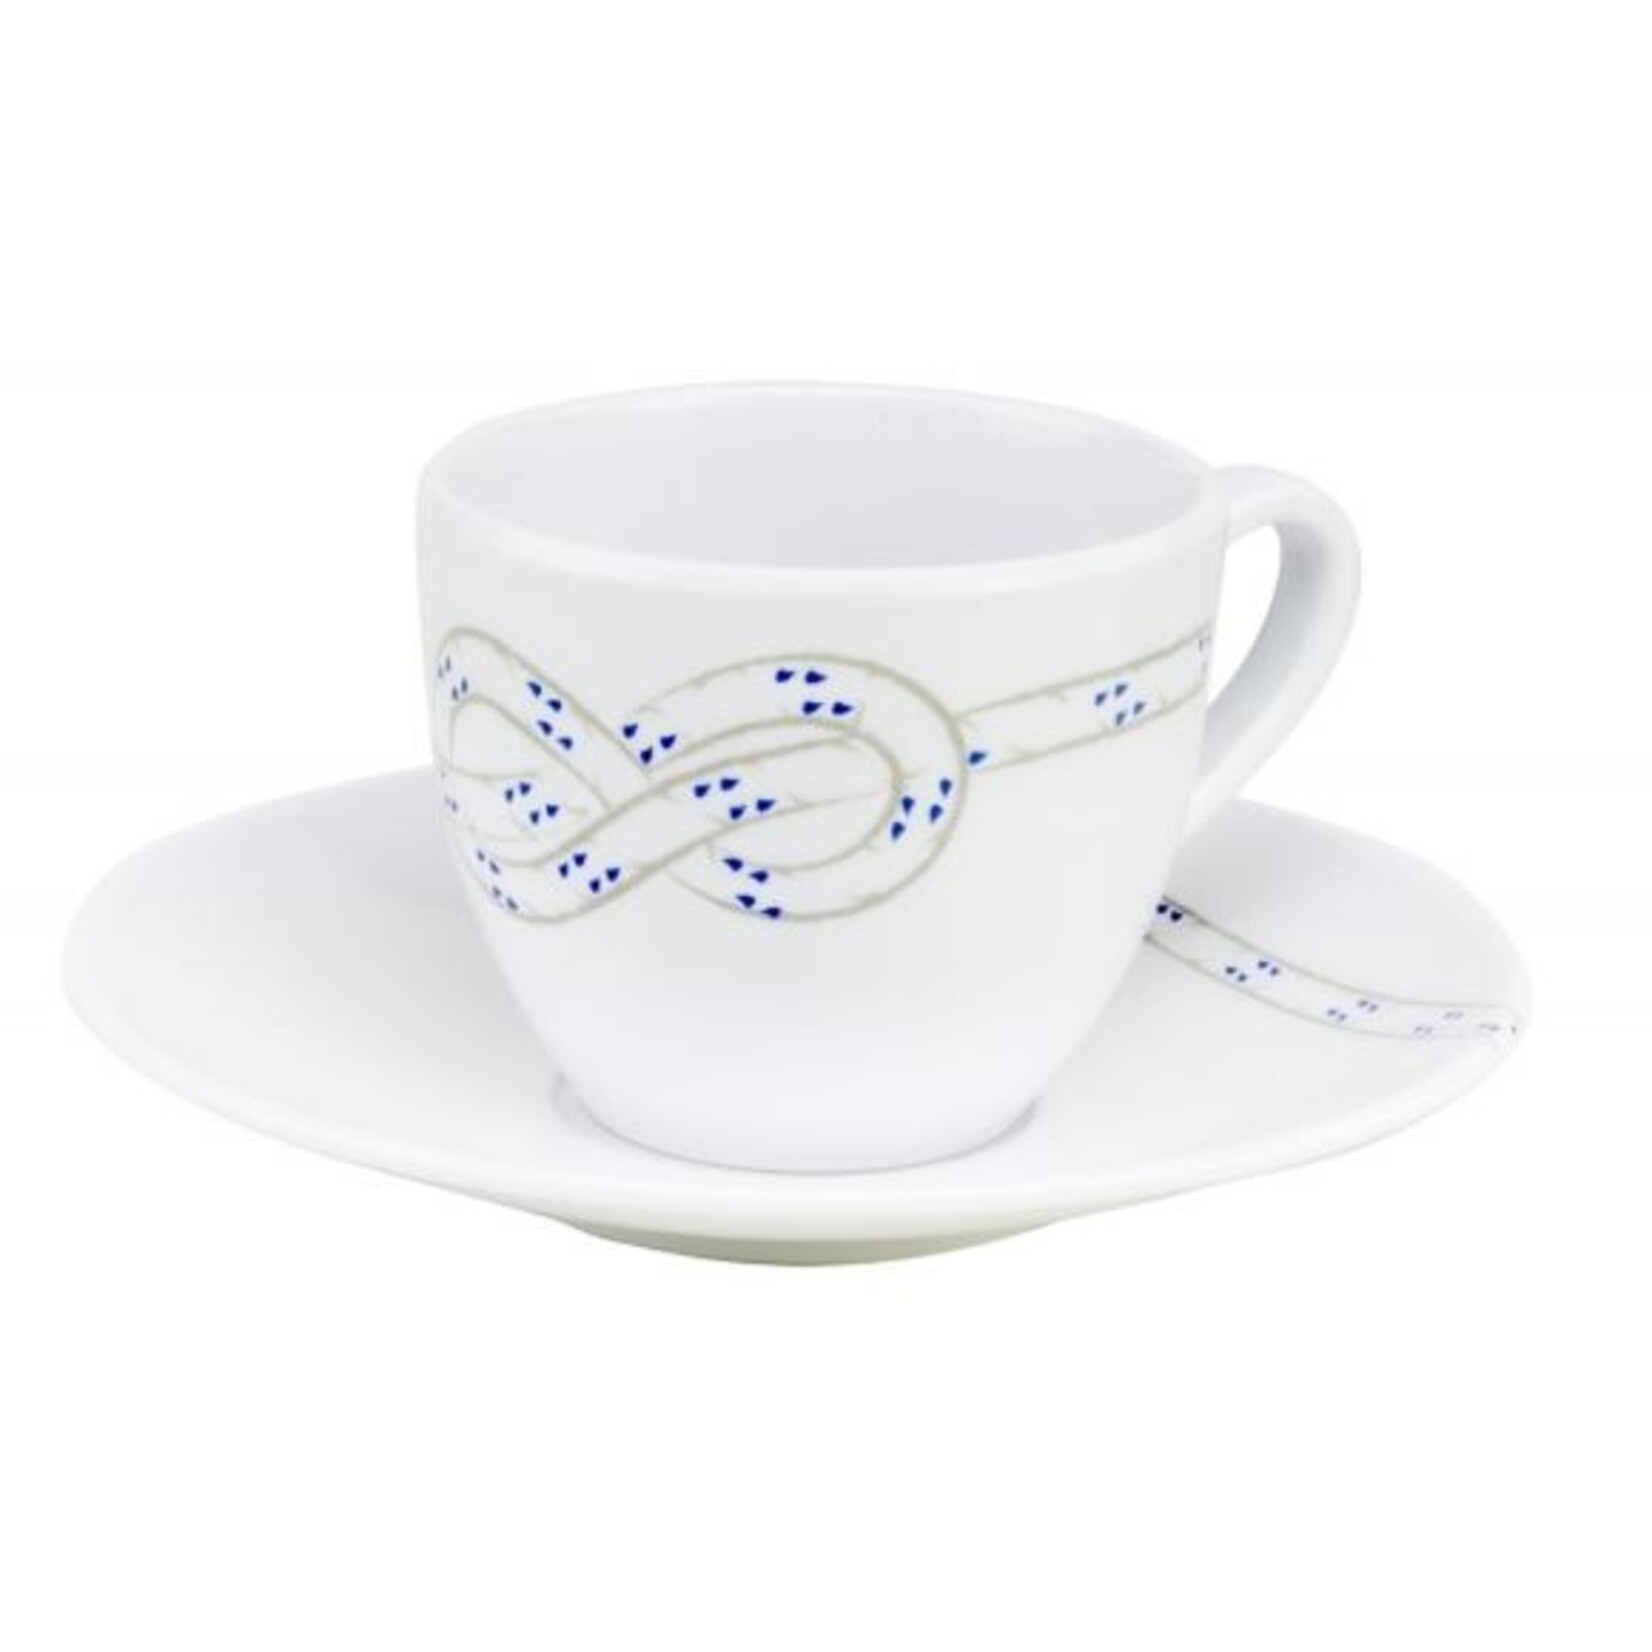 Plastimo South pacific cup and saucer